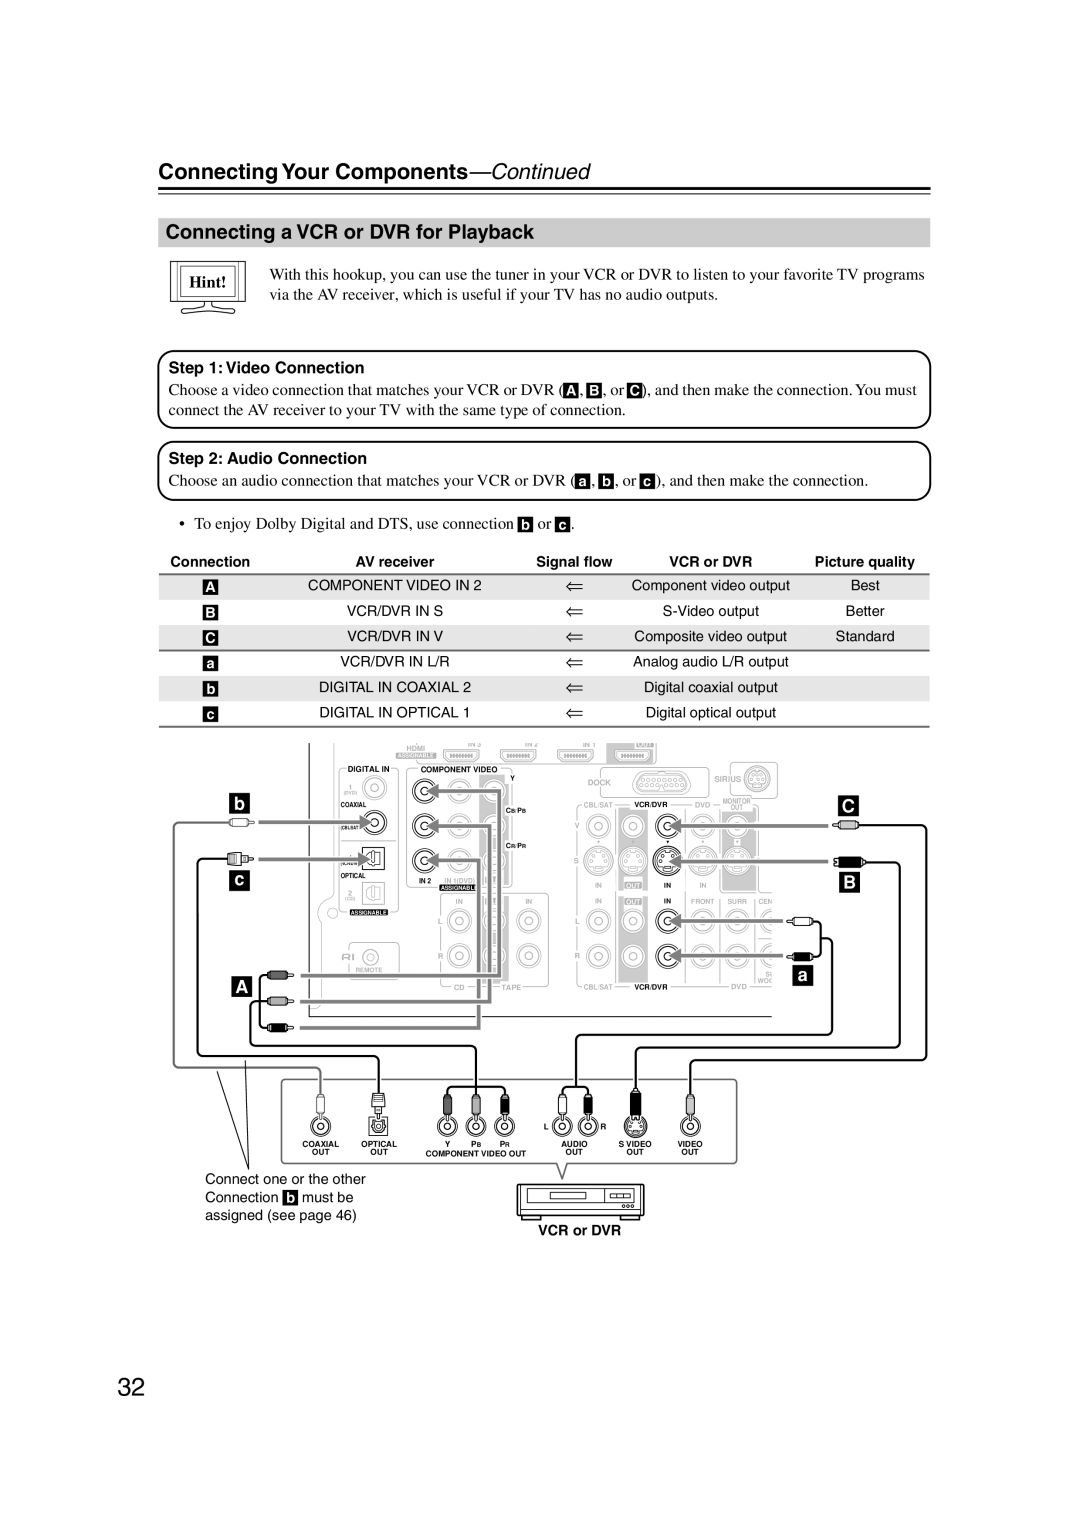 Onkyo HT-S5100 instruction manual Connecting a VCR or DVR for Playback, Connecting Your Components—Continued, Hint 